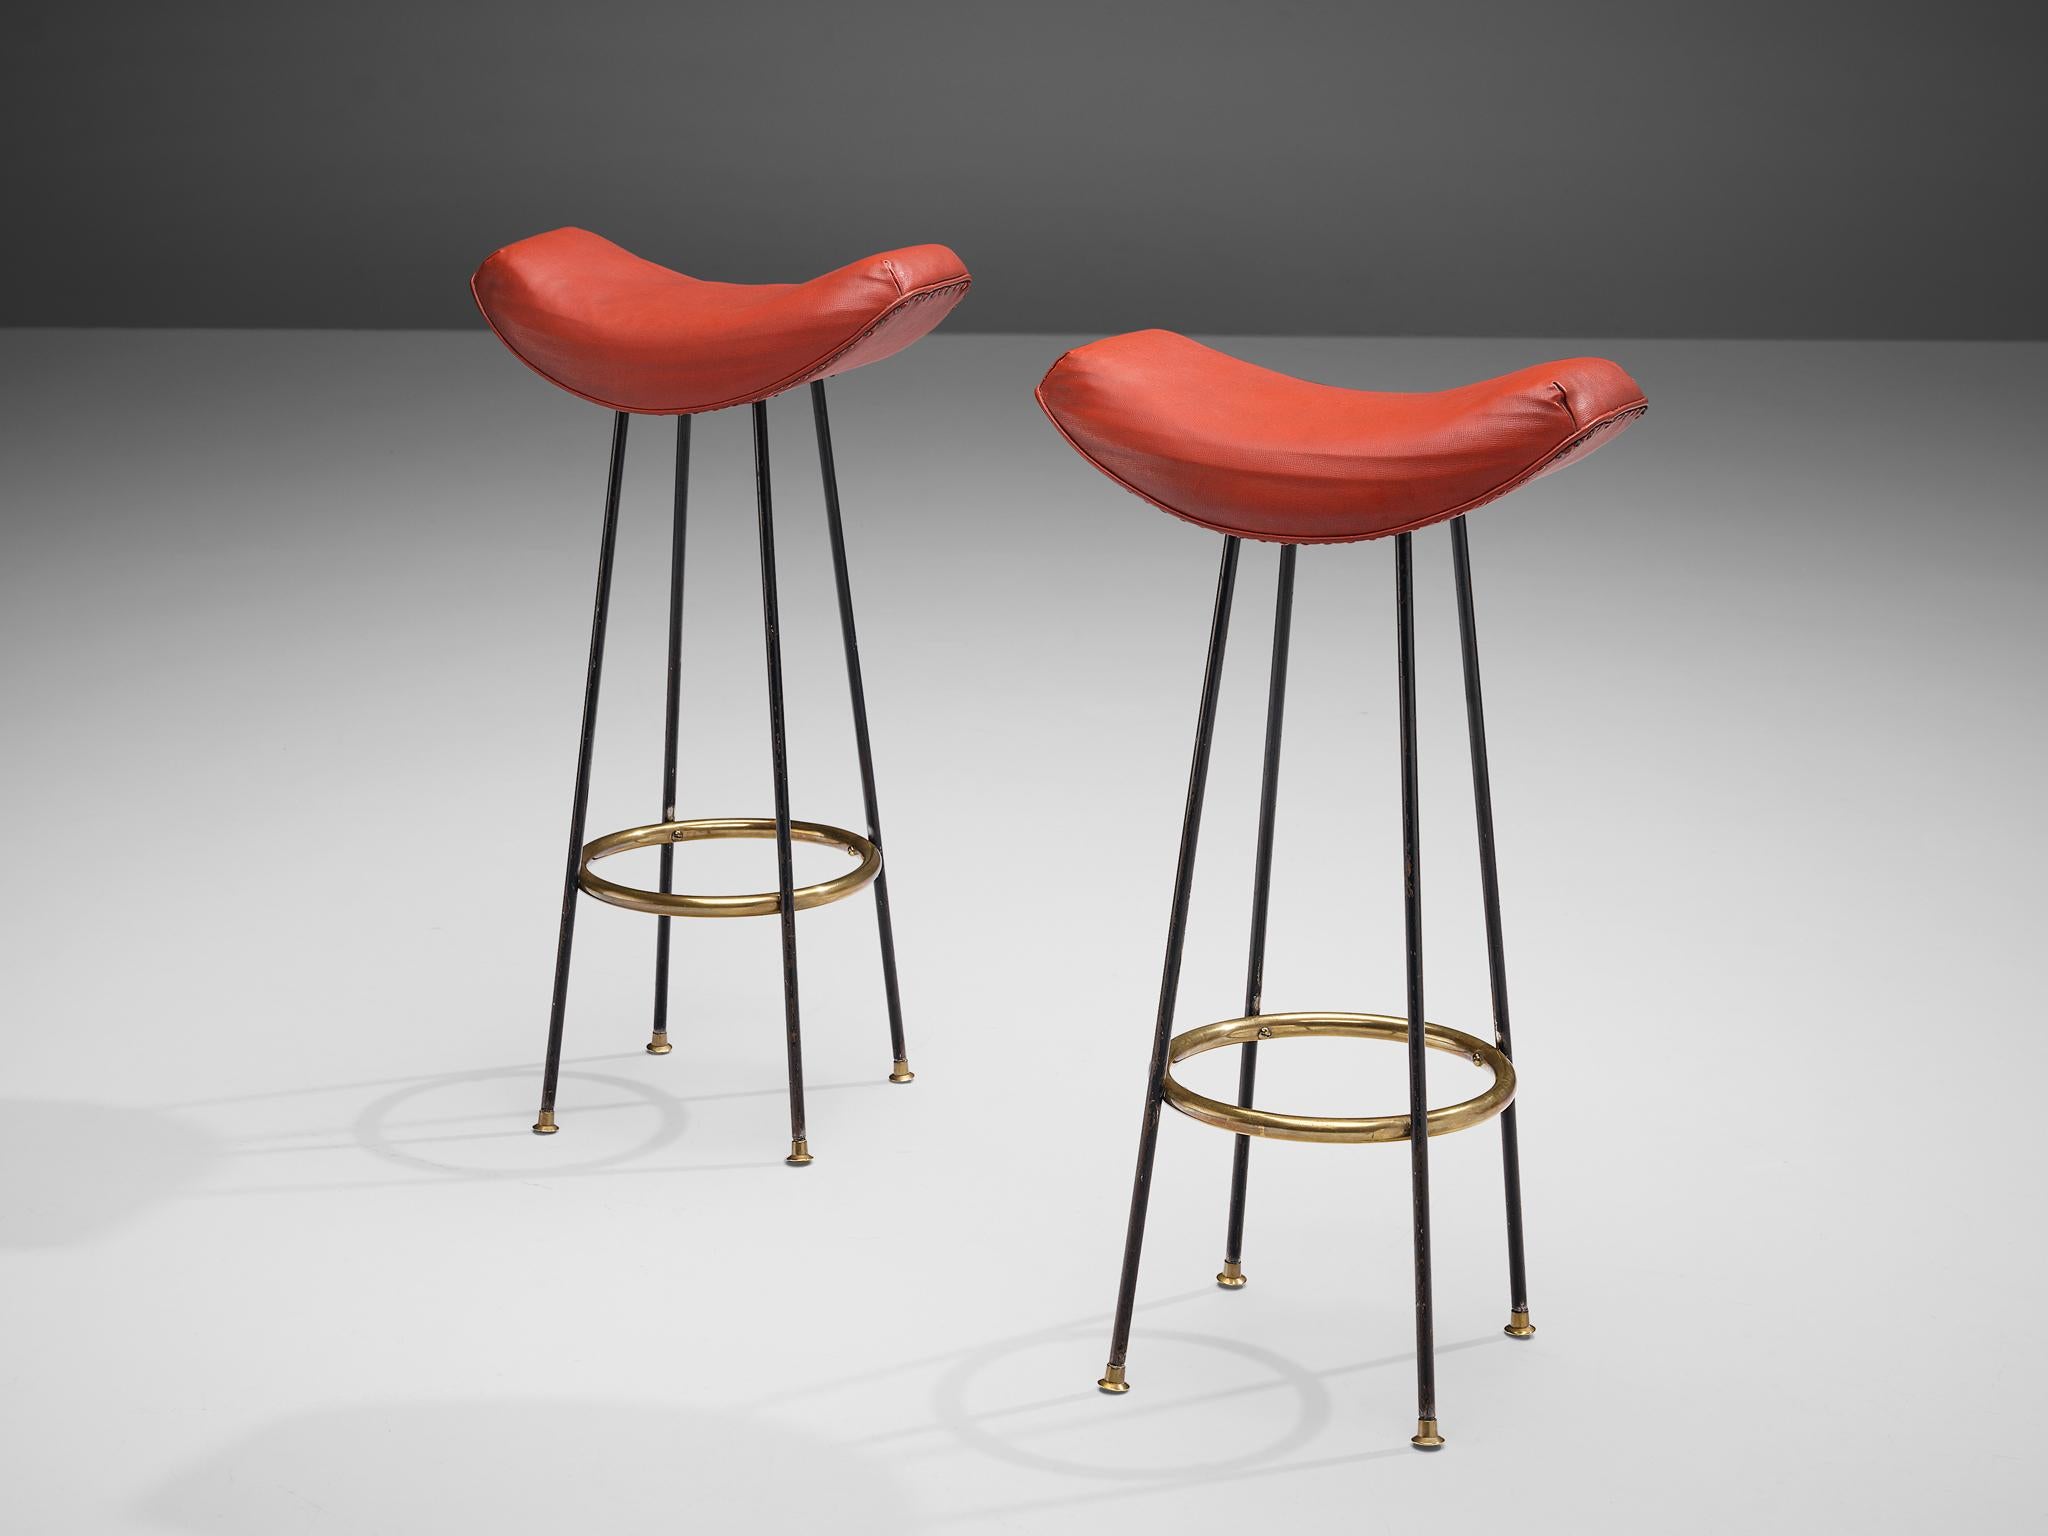 Martin Eisler for Forma, pair of bar stools, brass, metal, leather, Brazil, 1950s.

Pair of bar stools by Martin Eisler in the 1950s. The pair of bar stools has a conspicuous form, the seat is curved with both ends turning upwards, as well as an